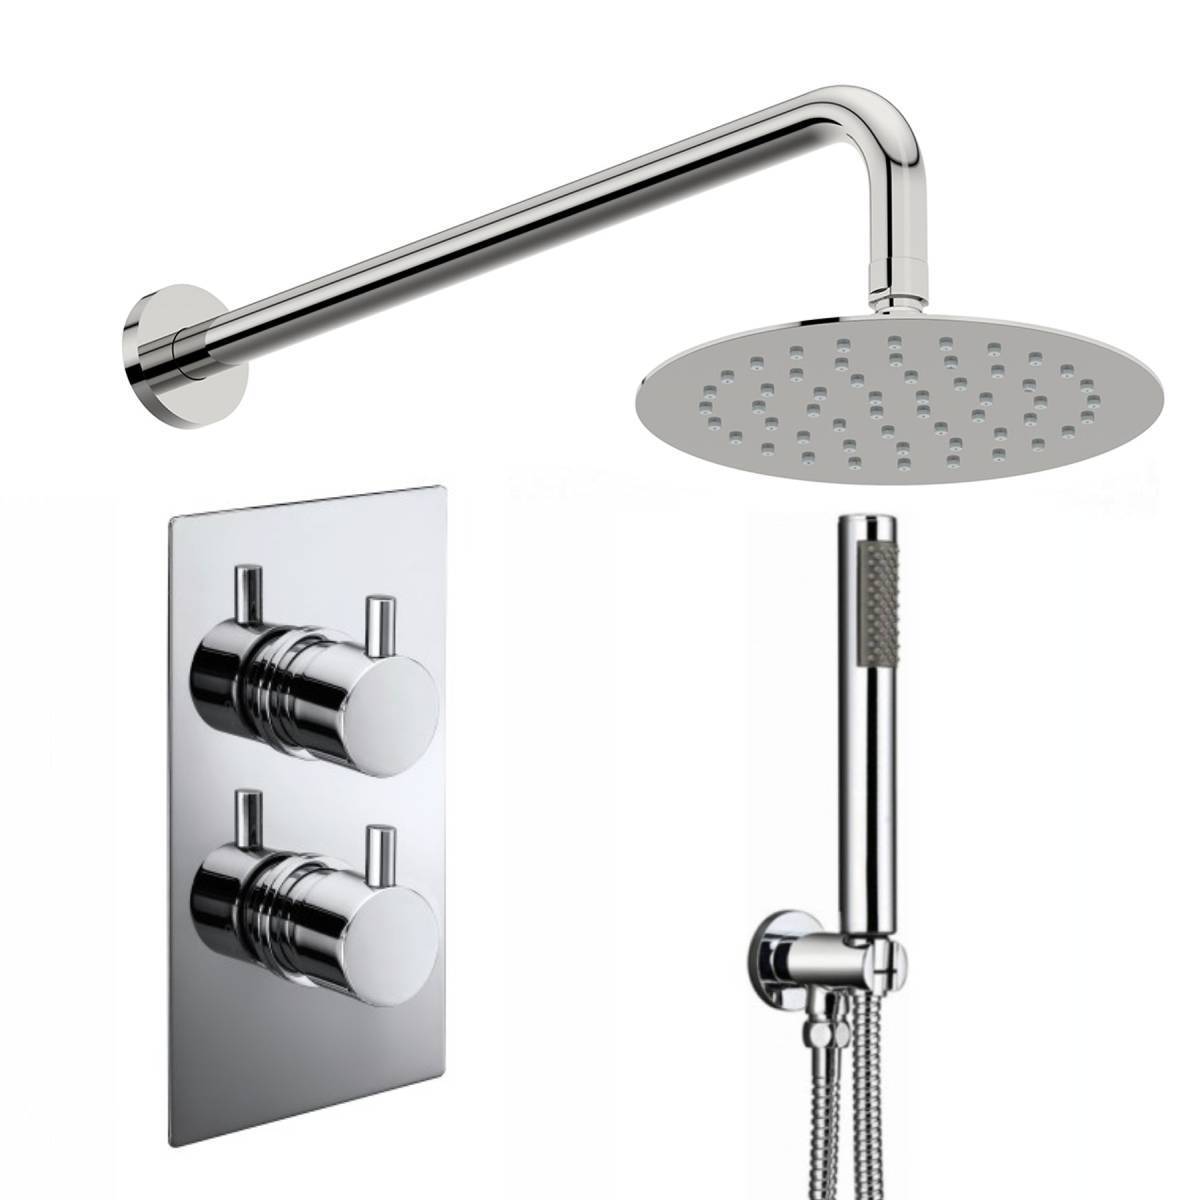 Round Twin Thermostatic Concealed Mixer Shower Kit with Wall Mounted 200mm Shower Head & Handset (12468)